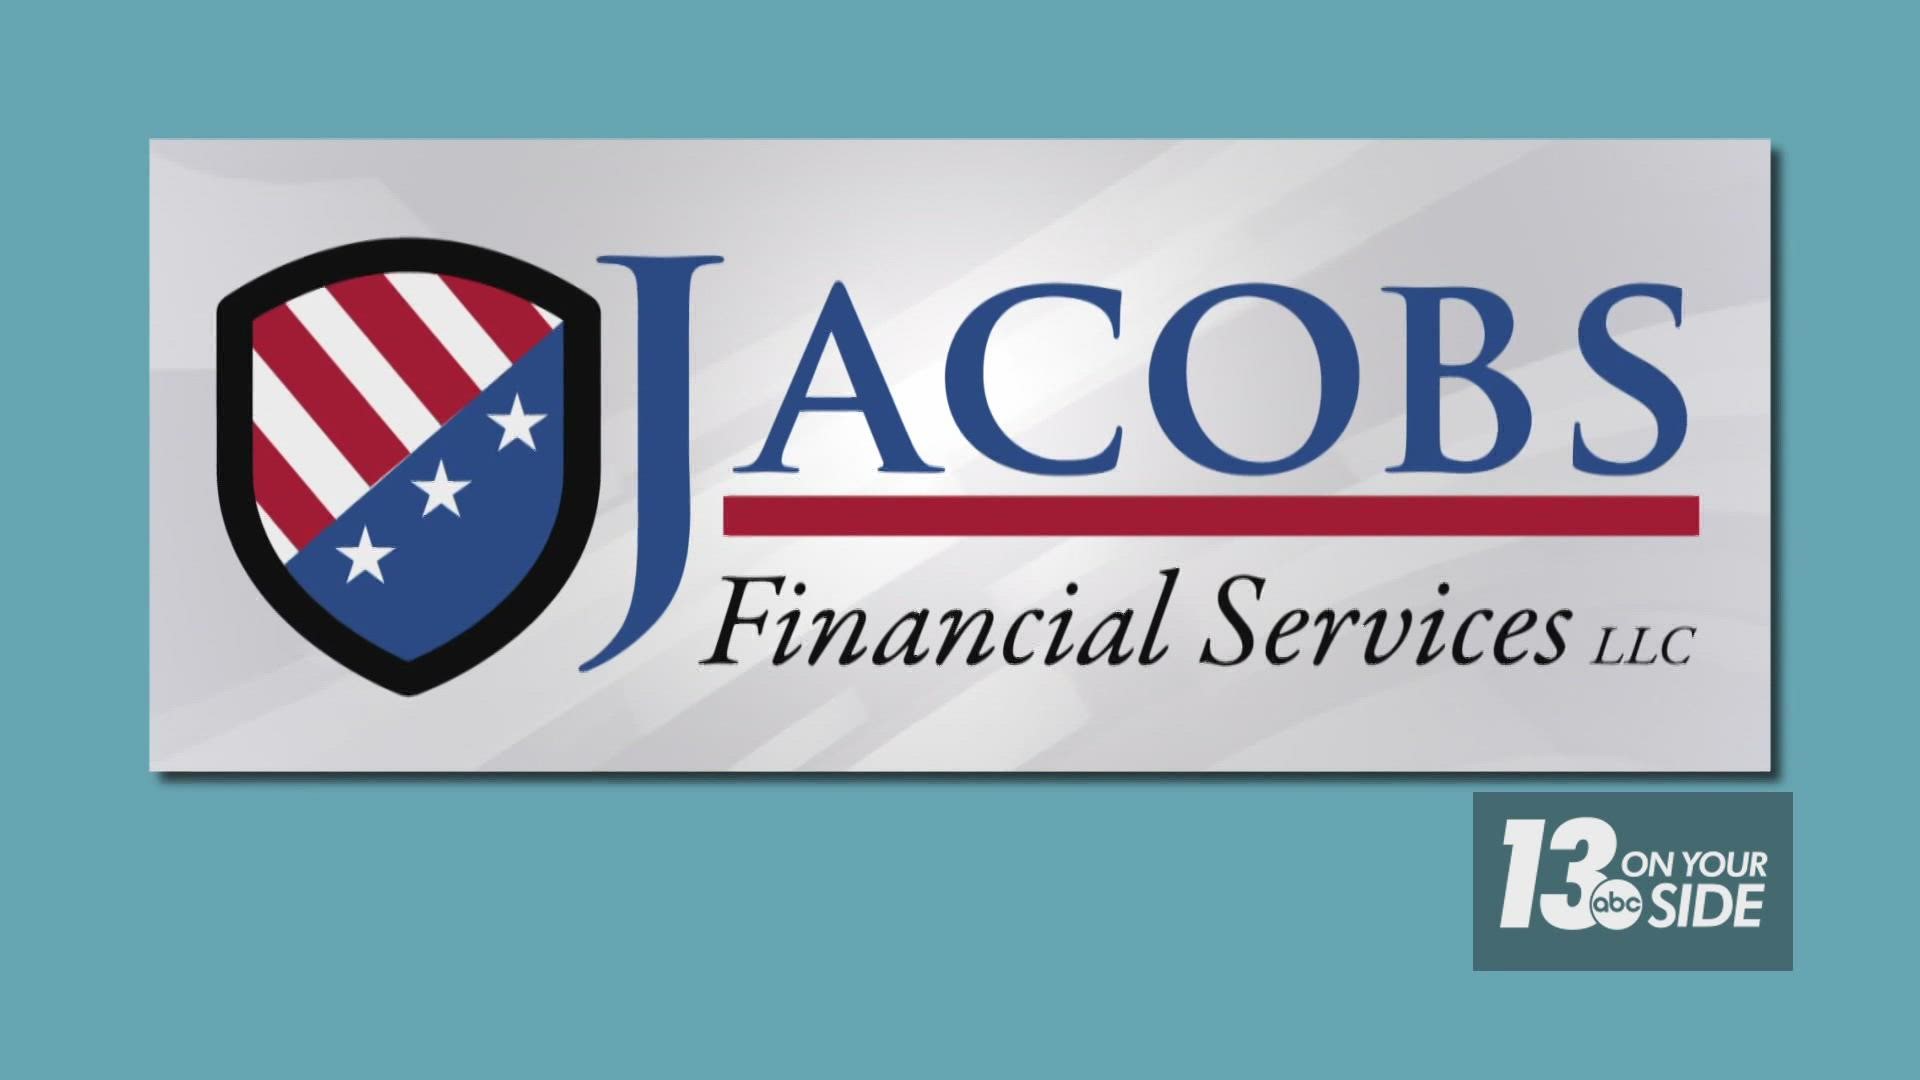 Tom Jacobs from Jacobs Financial Services has authored a book that he says will give readers peace of mind about their retirement.